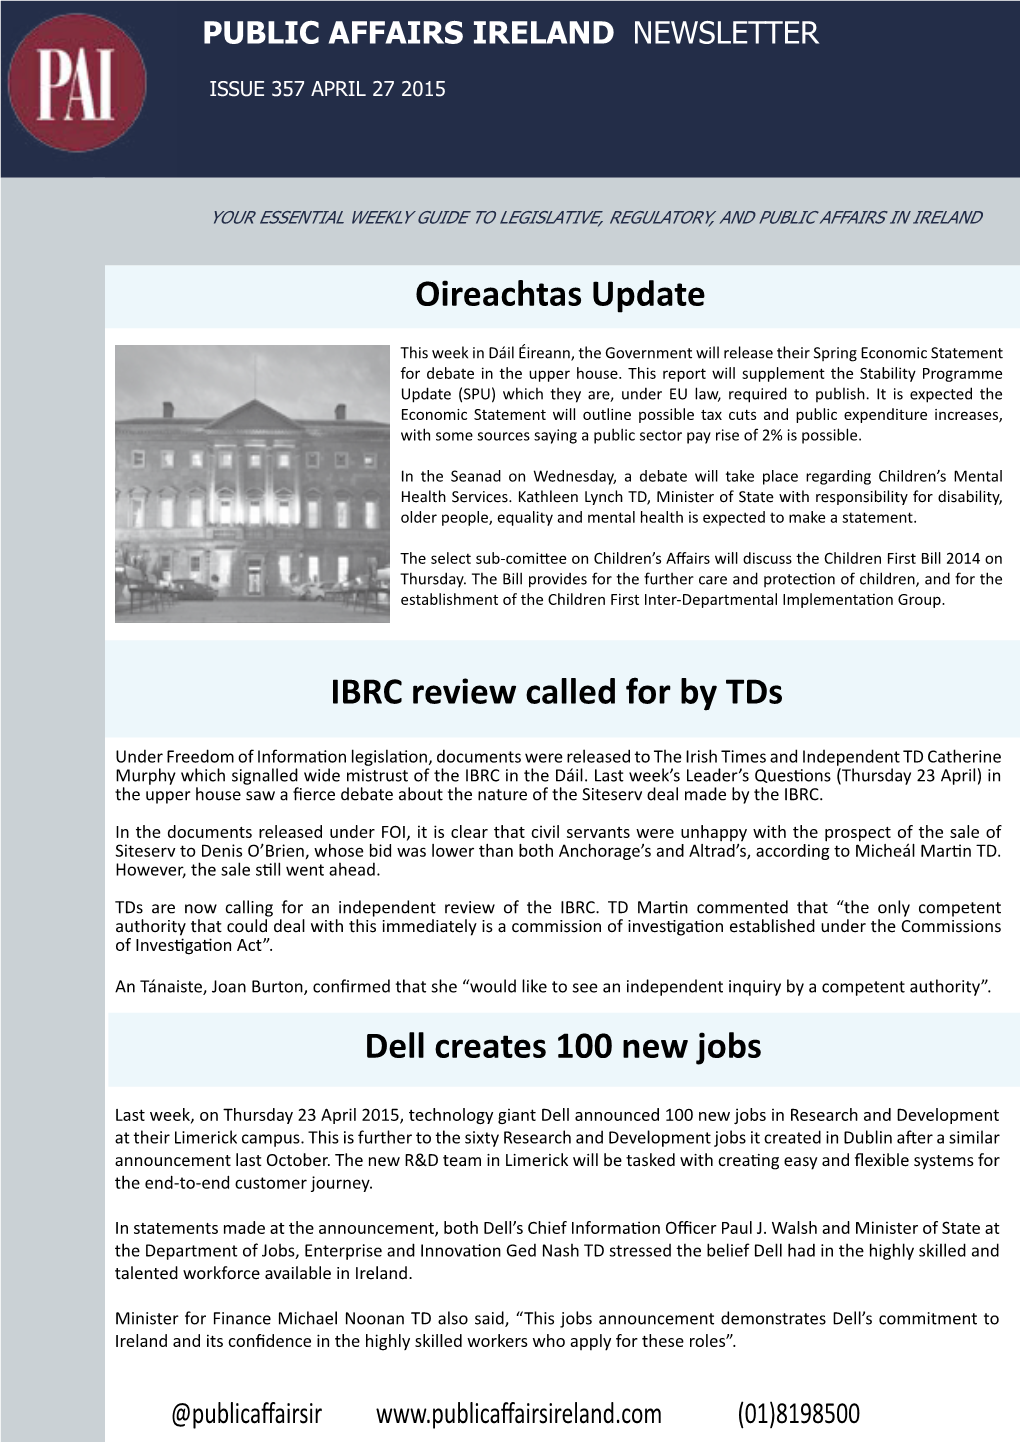 IBRC Review Called for by Tds Oireachtas Update Dell Creates 100